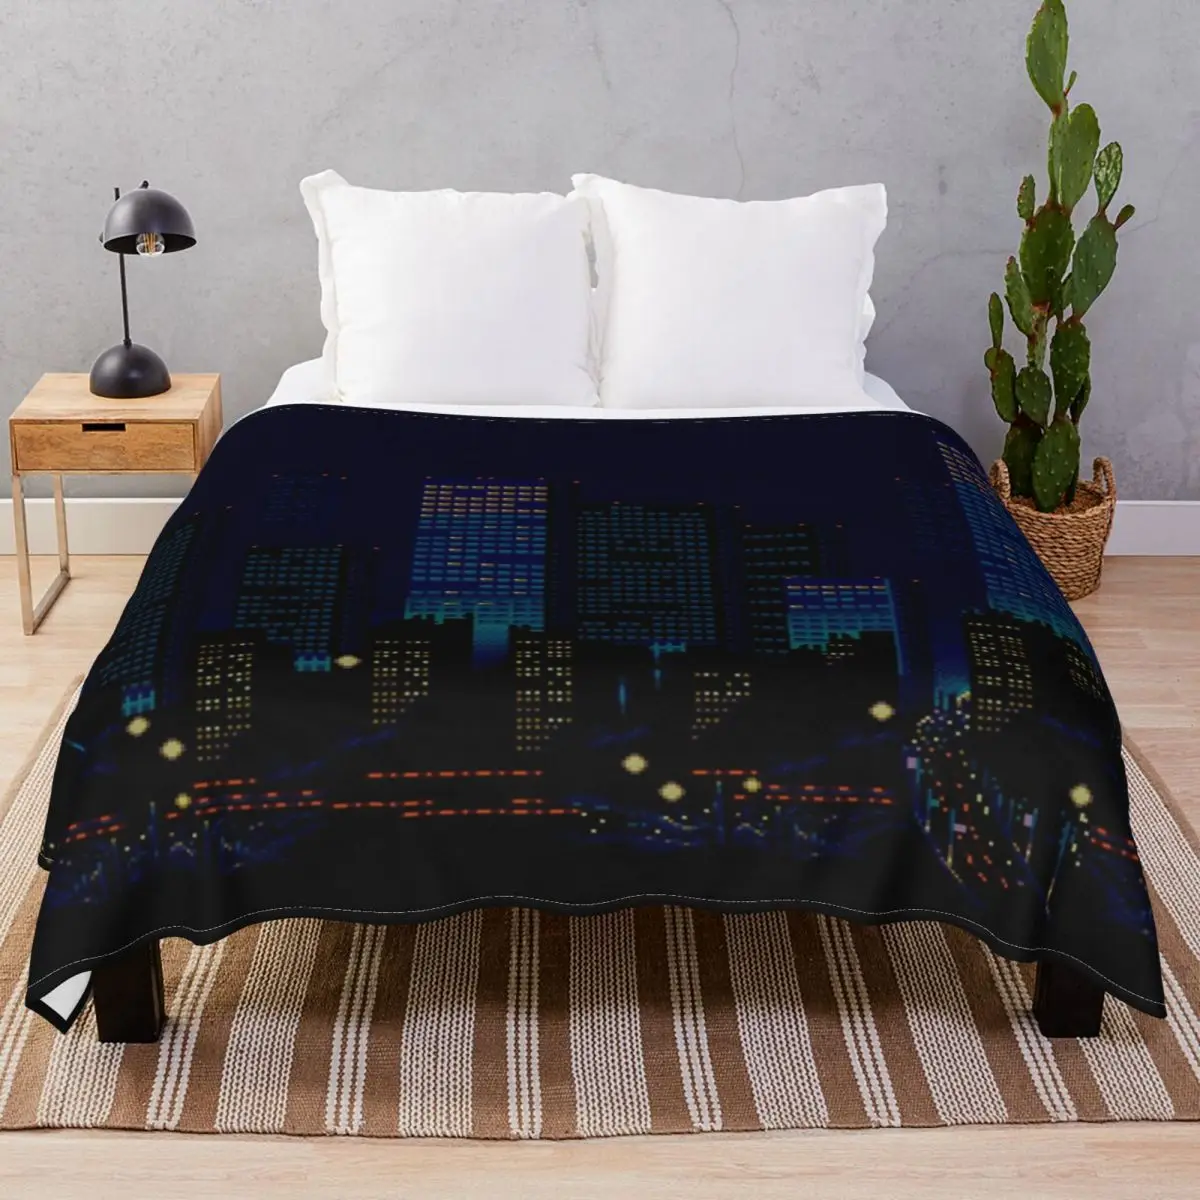 Streets Of Rage 16 Bit City Blankets Coral Fleece Spring Autumn Fluffy Throw Blanket for Bedding Home Couch Travel Office